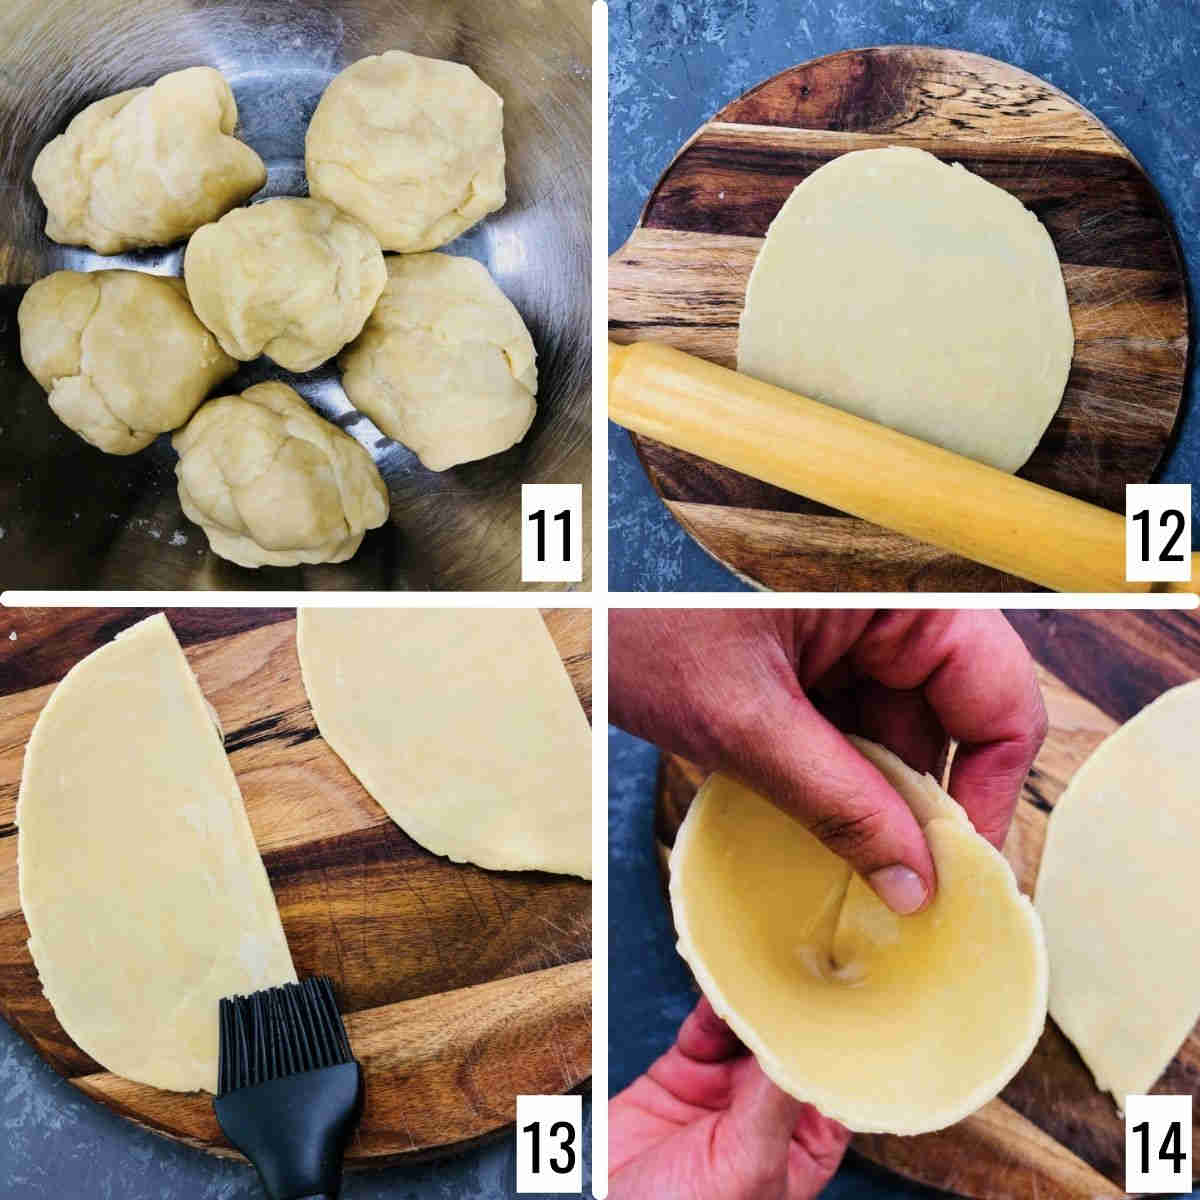 make cones with the dough.